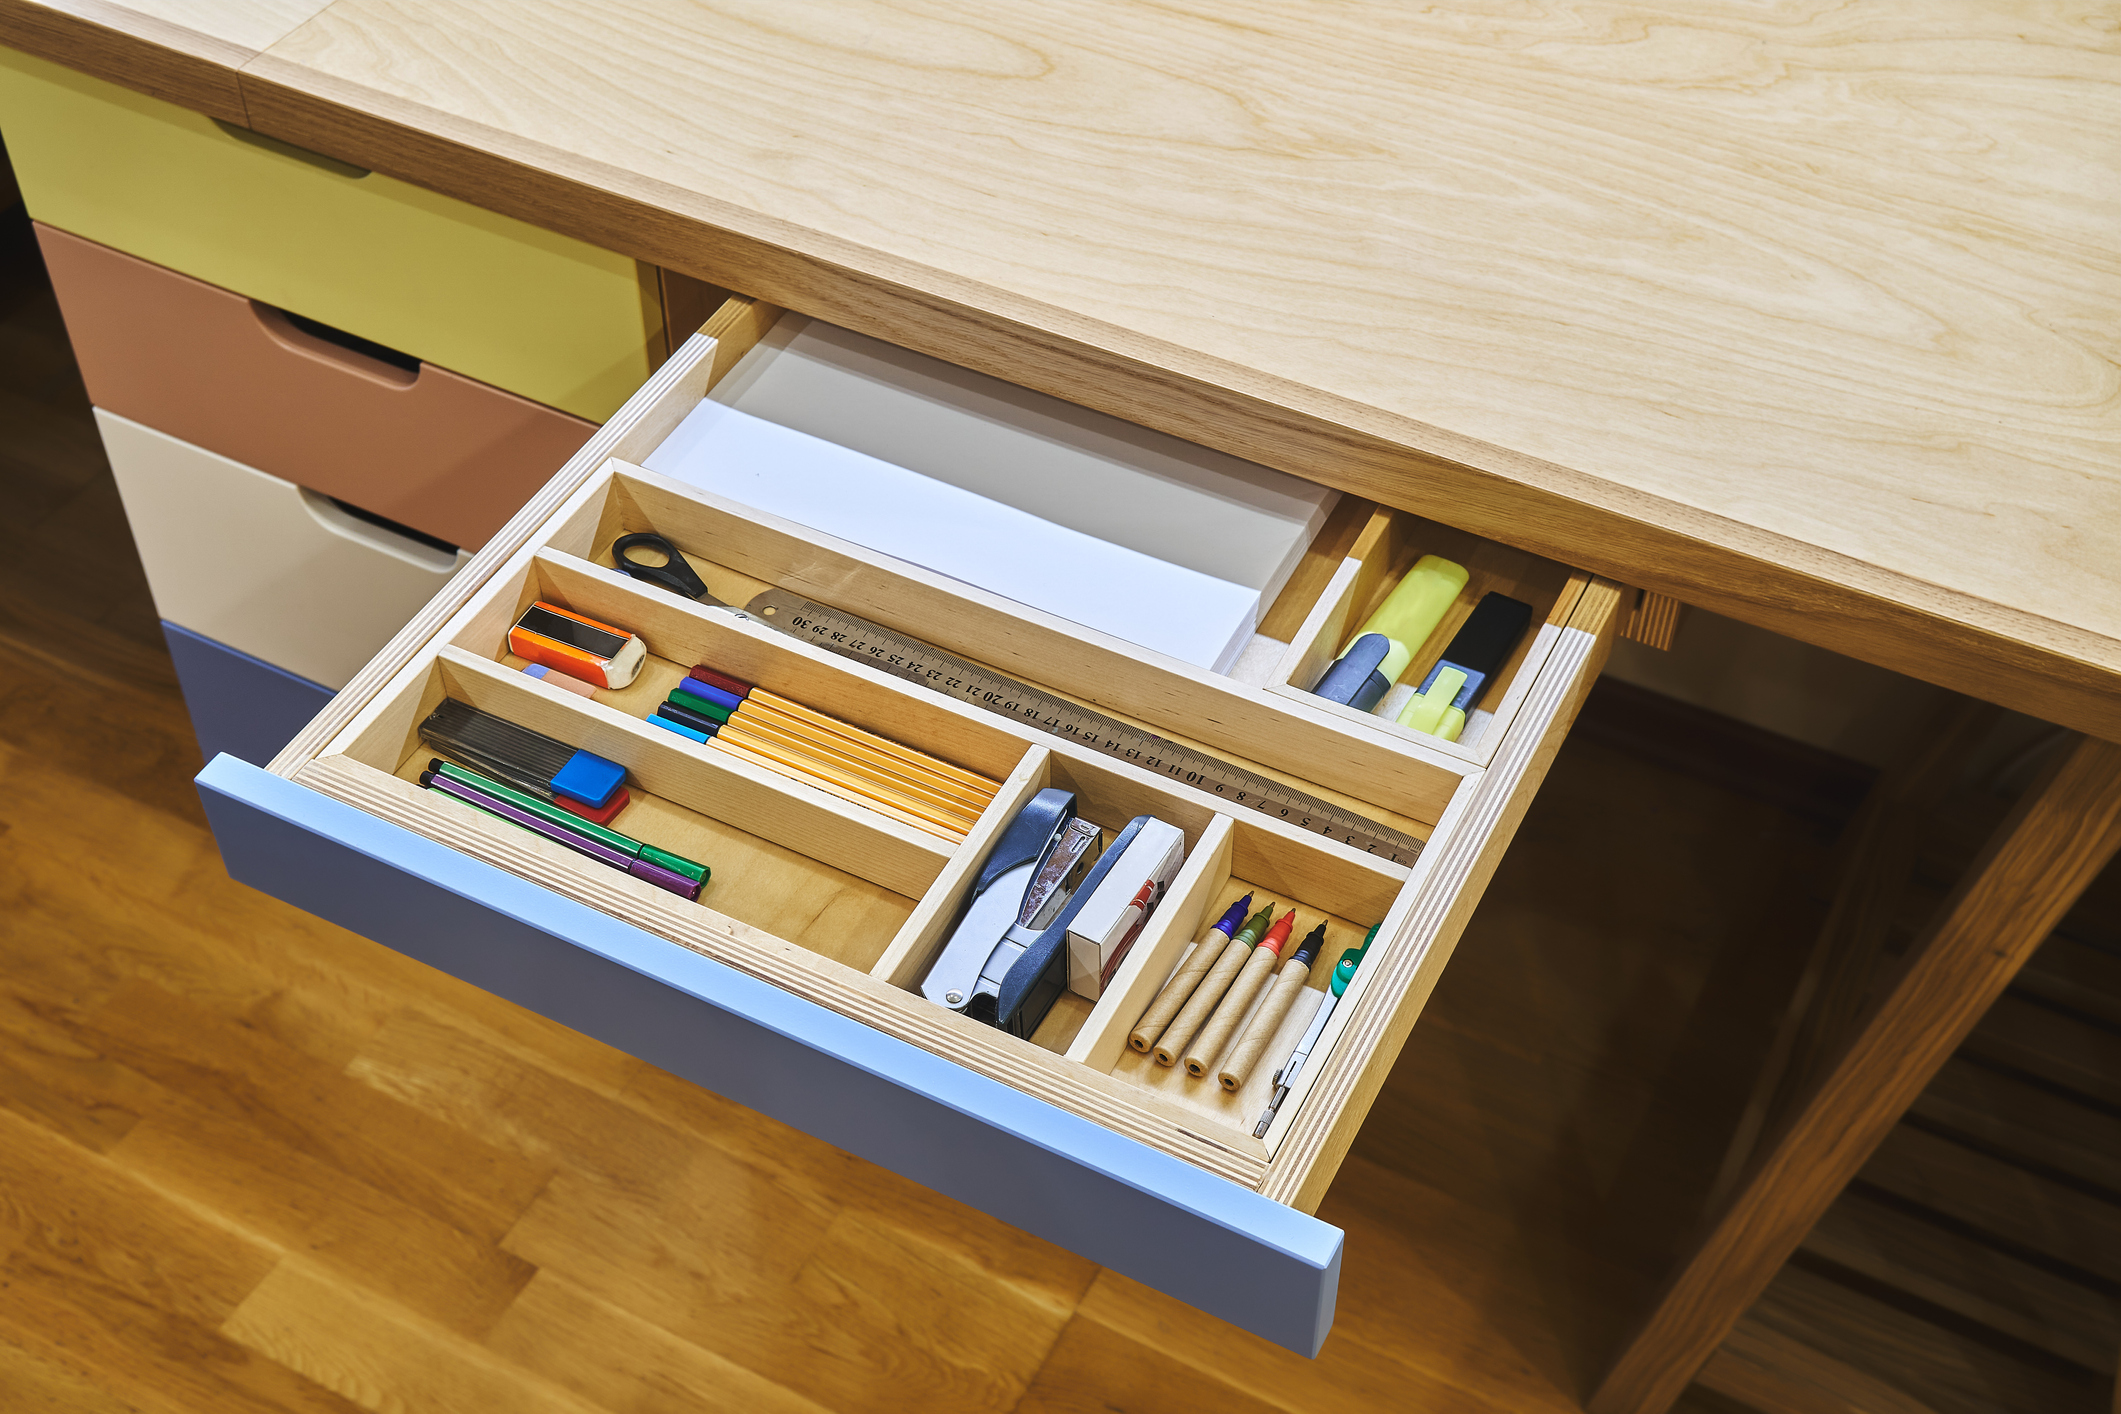 Ready for school. Neat drawer with assorted stationery for school